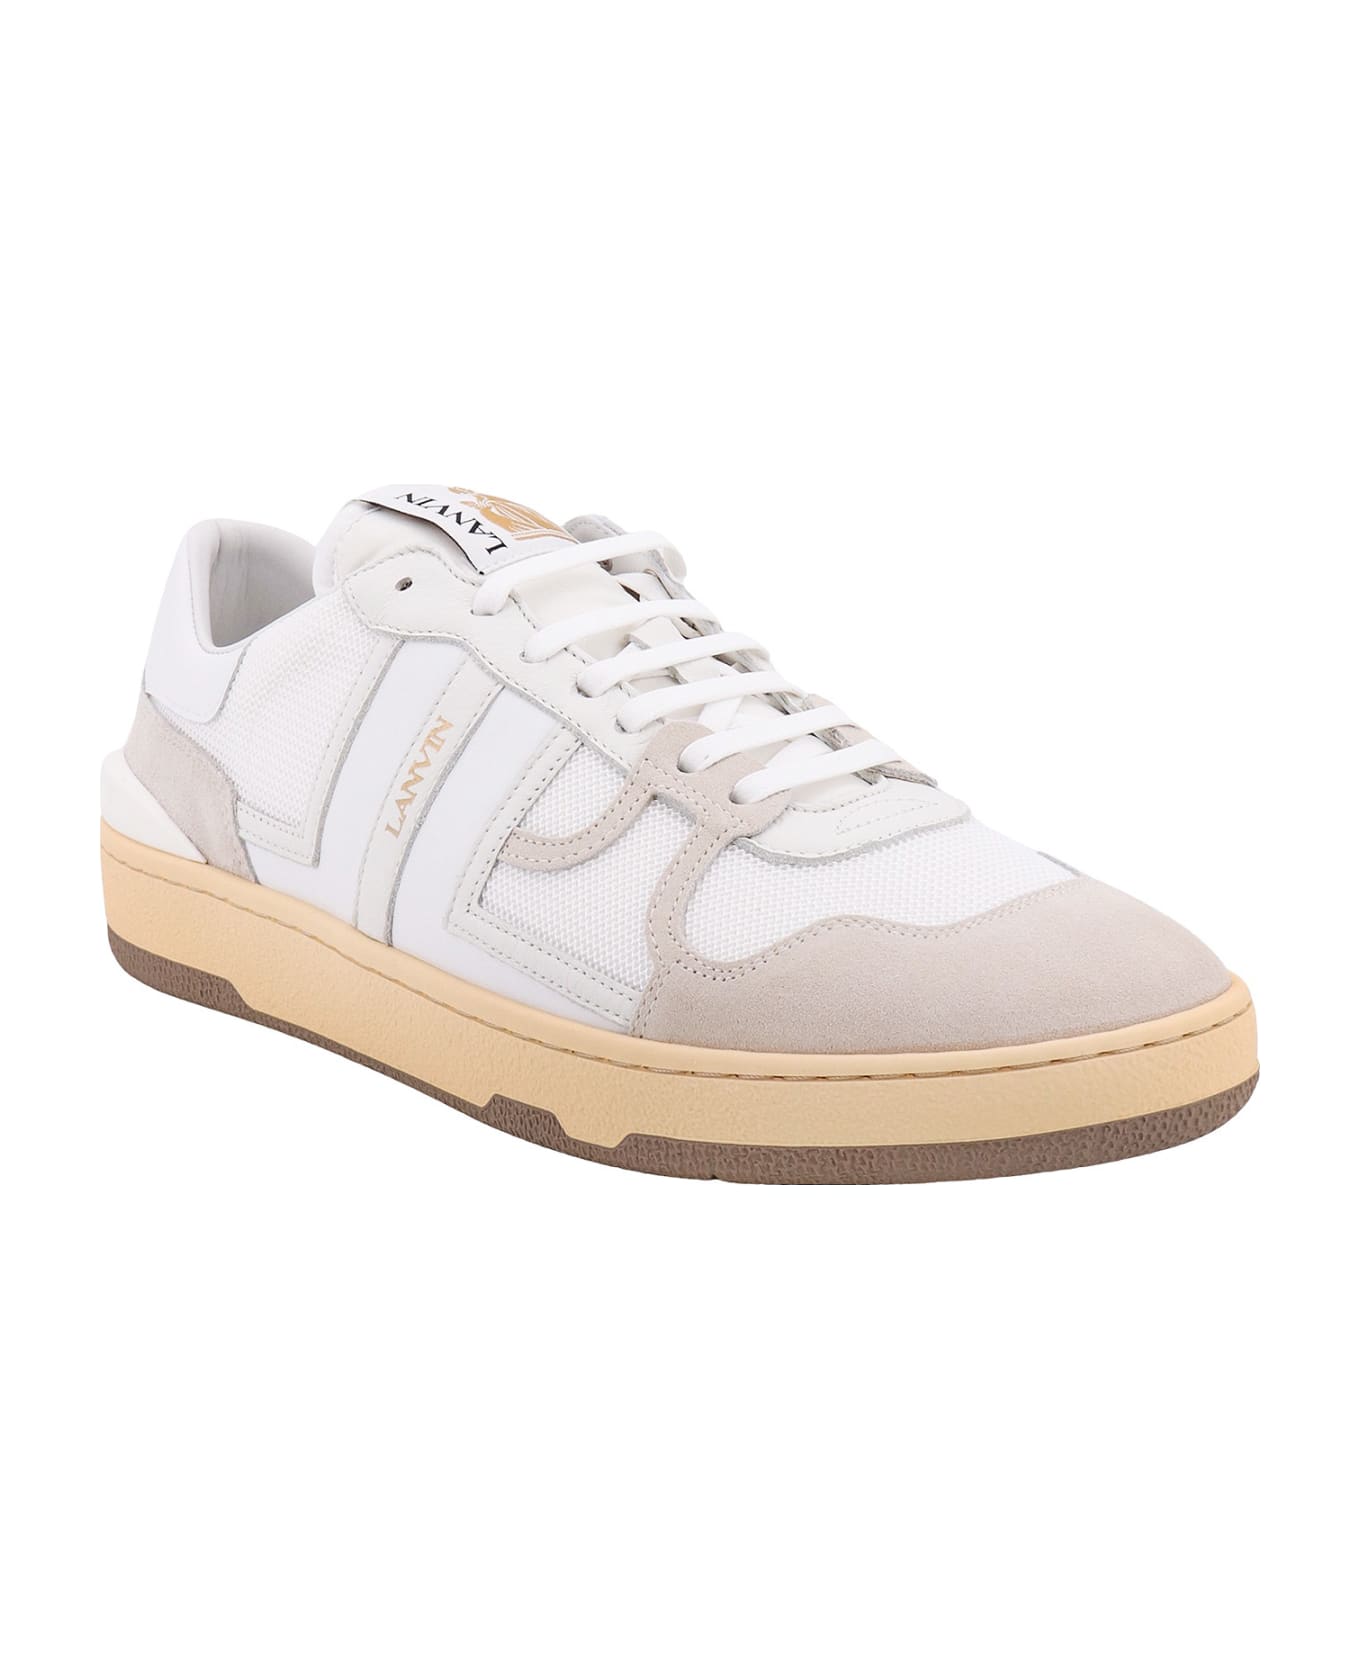 Lanvin Clay Low Sneakers - White